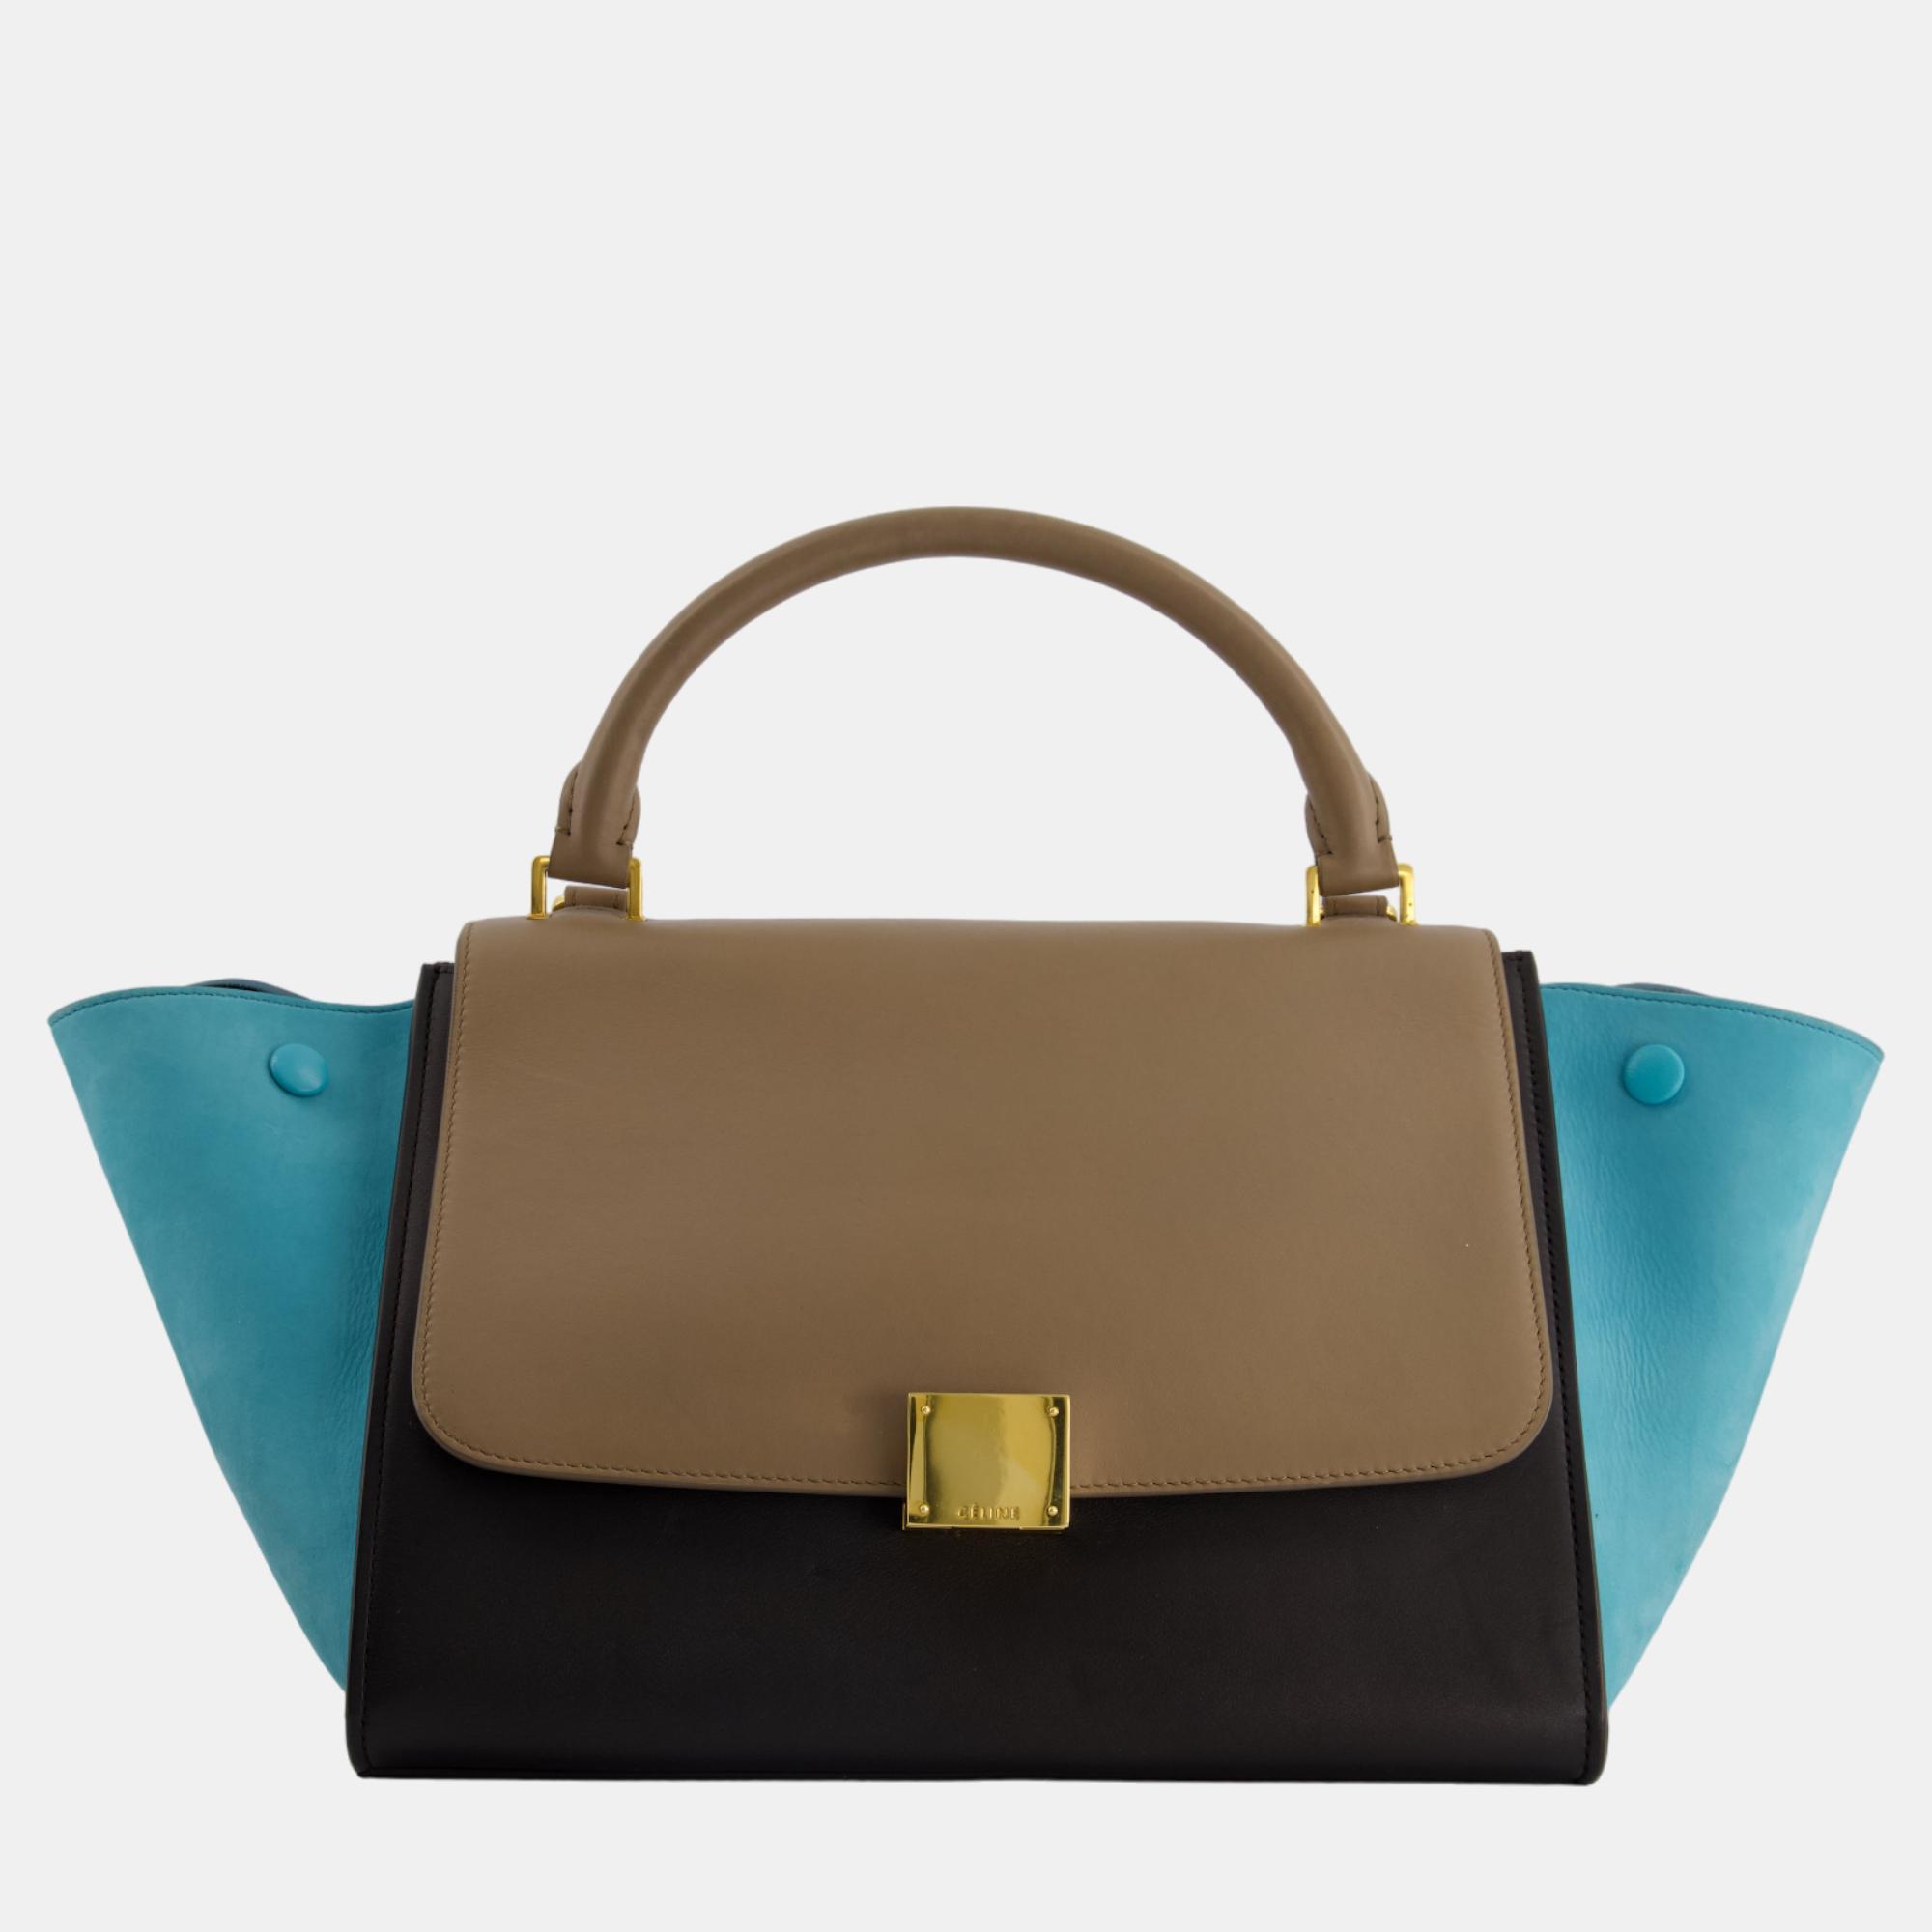 Celine Black, Taupe And Turquoise Suede And Calfskin Trapeze Bag With Gold Hardware